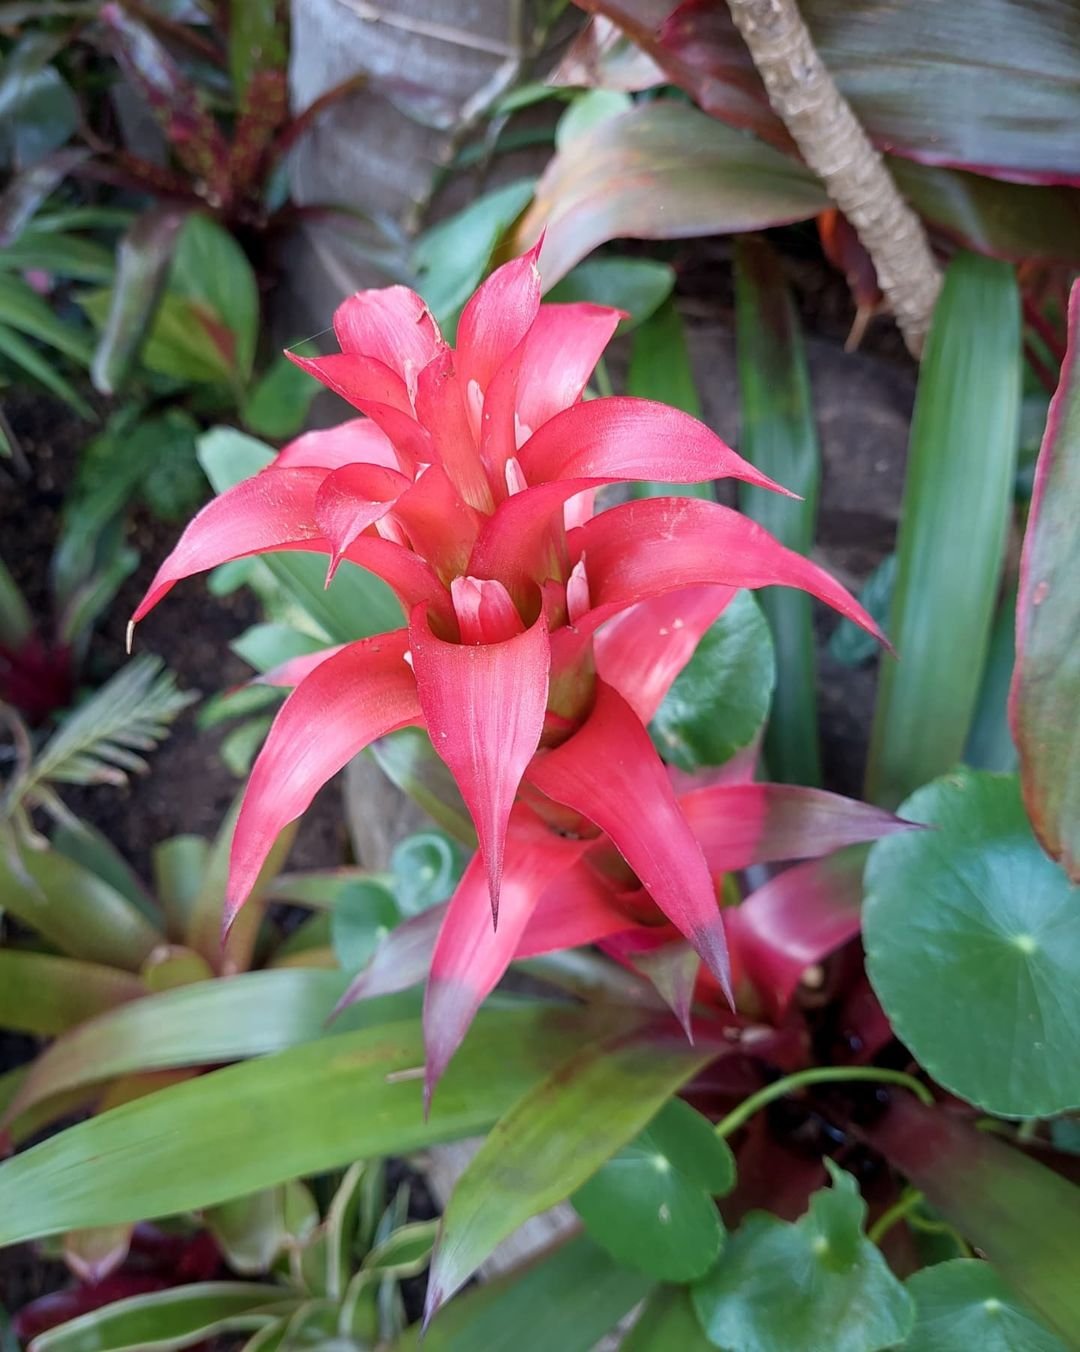  Red Guzmania flower with green leaves in garden.